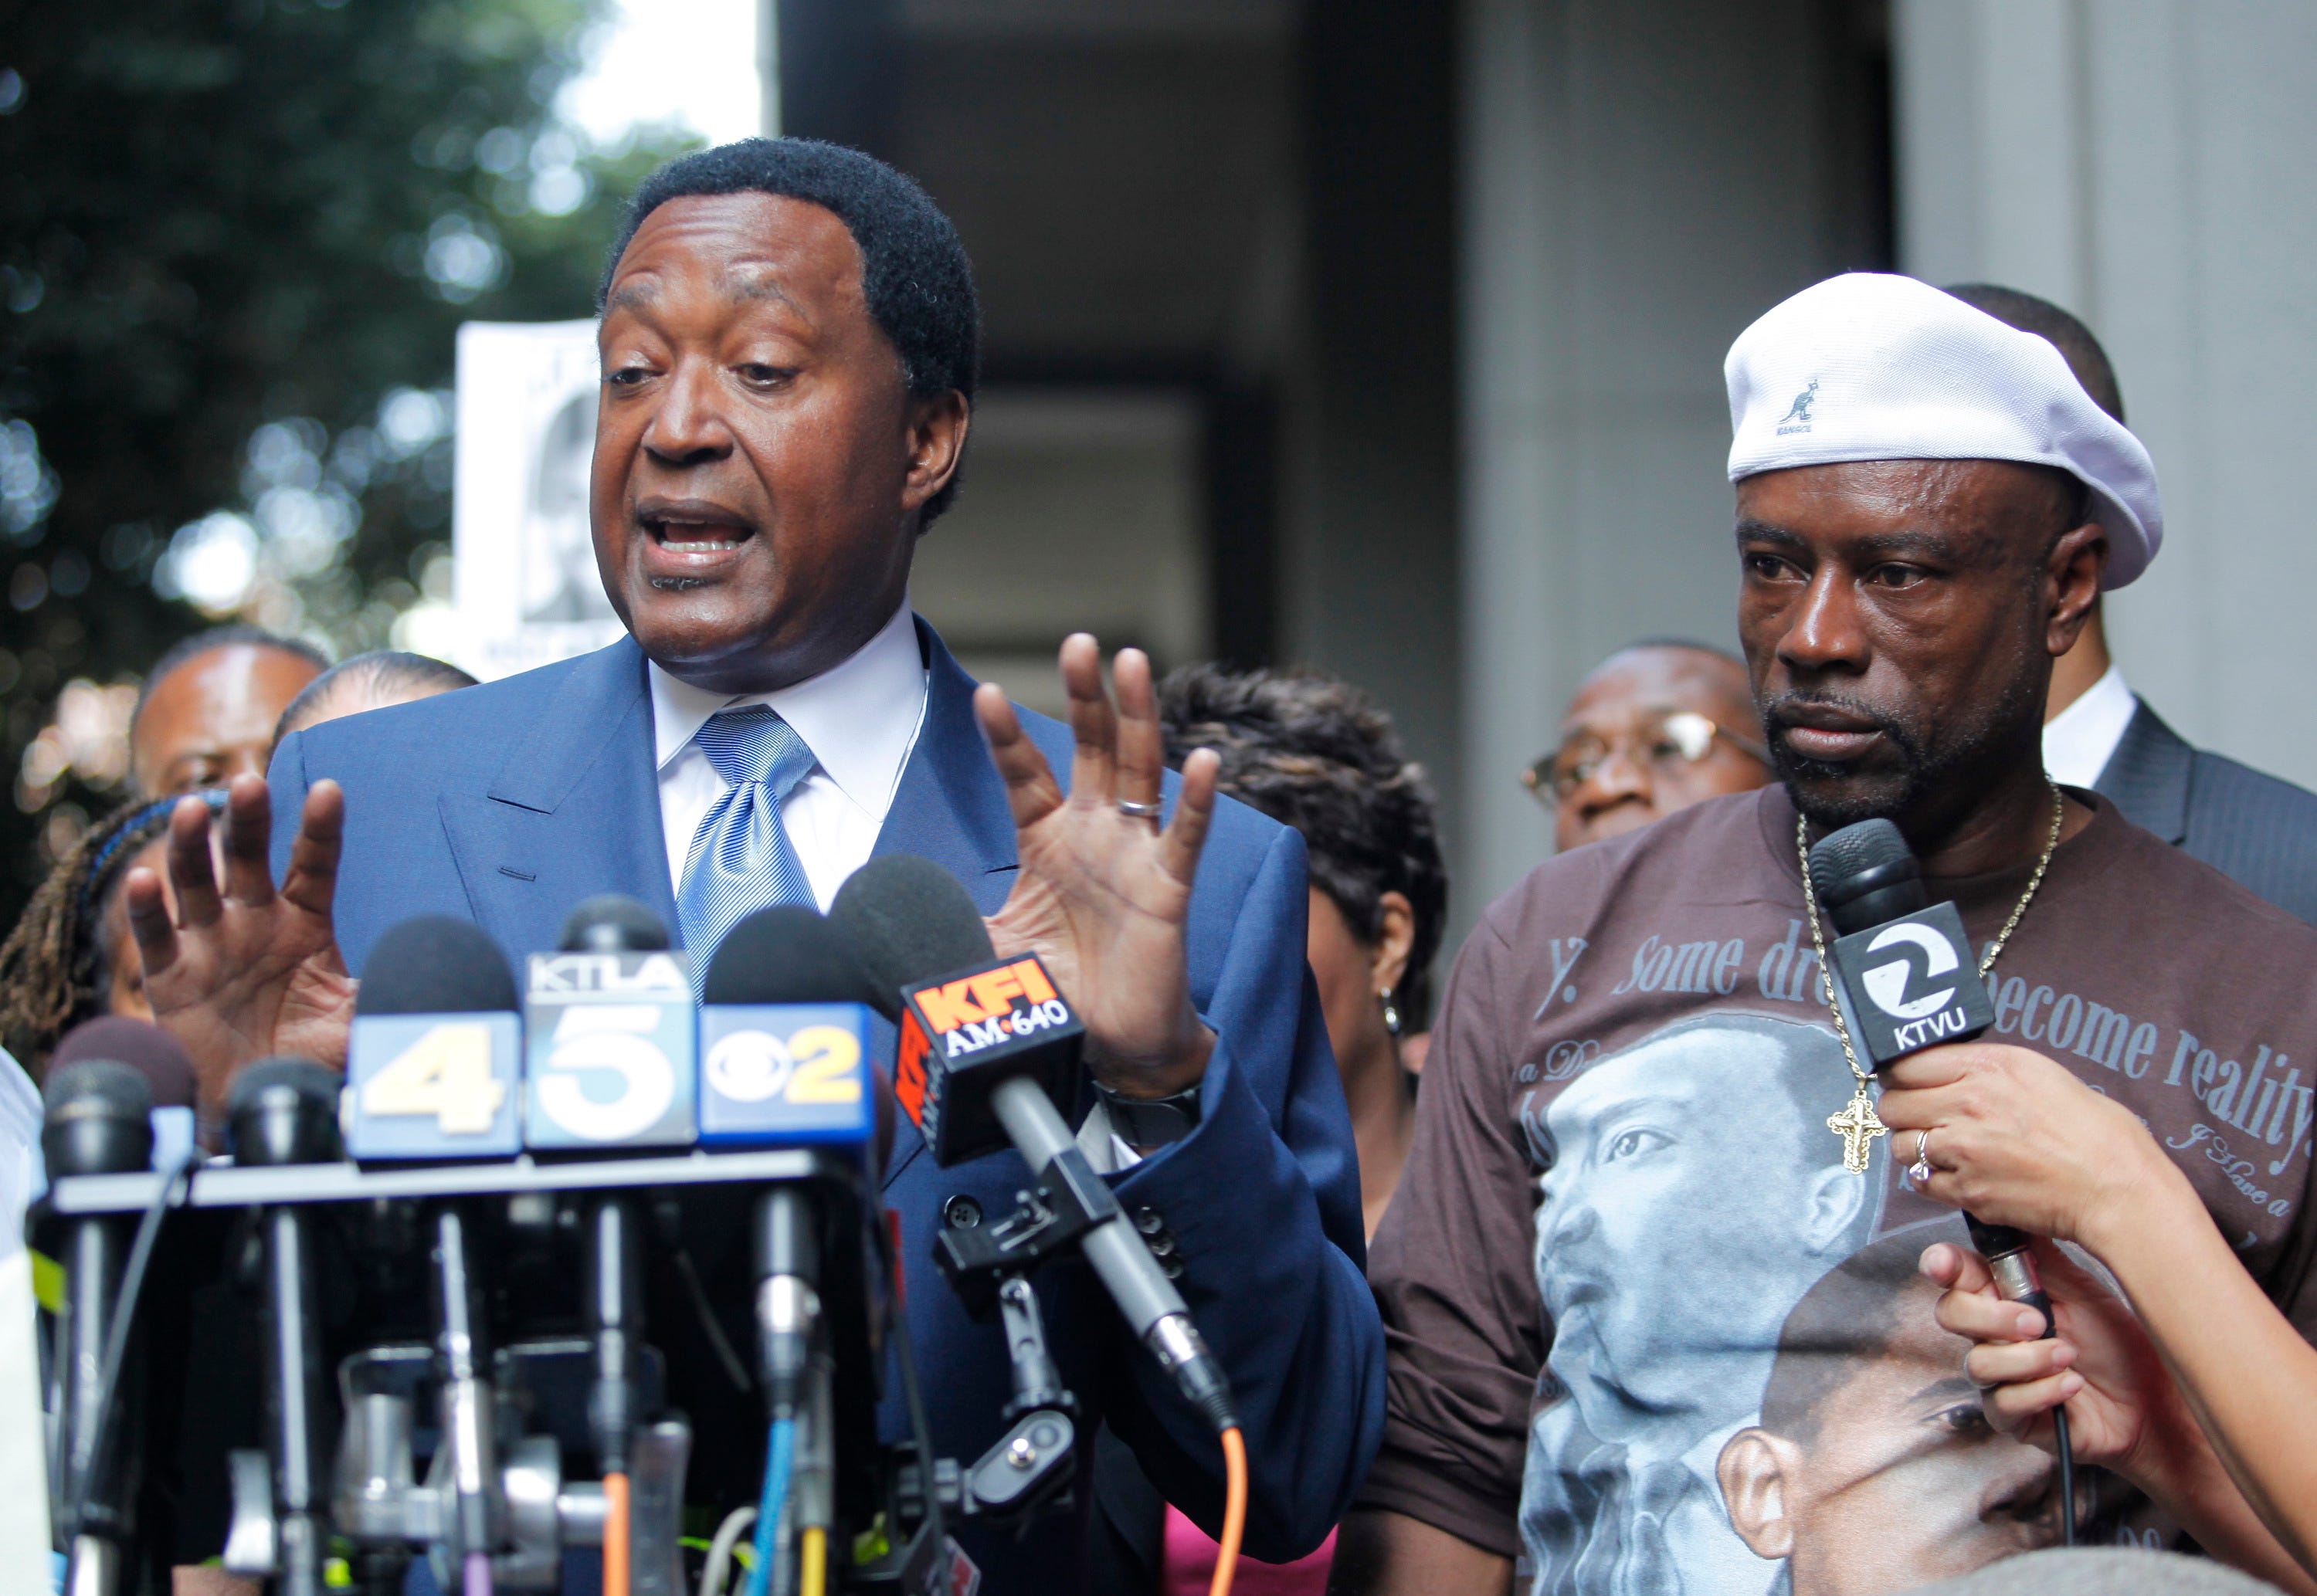 In this 2010 photo, John Burris, left, the Oscar Grant family attorney, and Cephus "Uncle Bobby" Johnson, right, express their disappointment outside a Los Angeles court after a jury found BART police officer Johannes Mehserle only guilty of involuntary manslaughter of Grant while he laid on his stomach on an Oakland train platform.